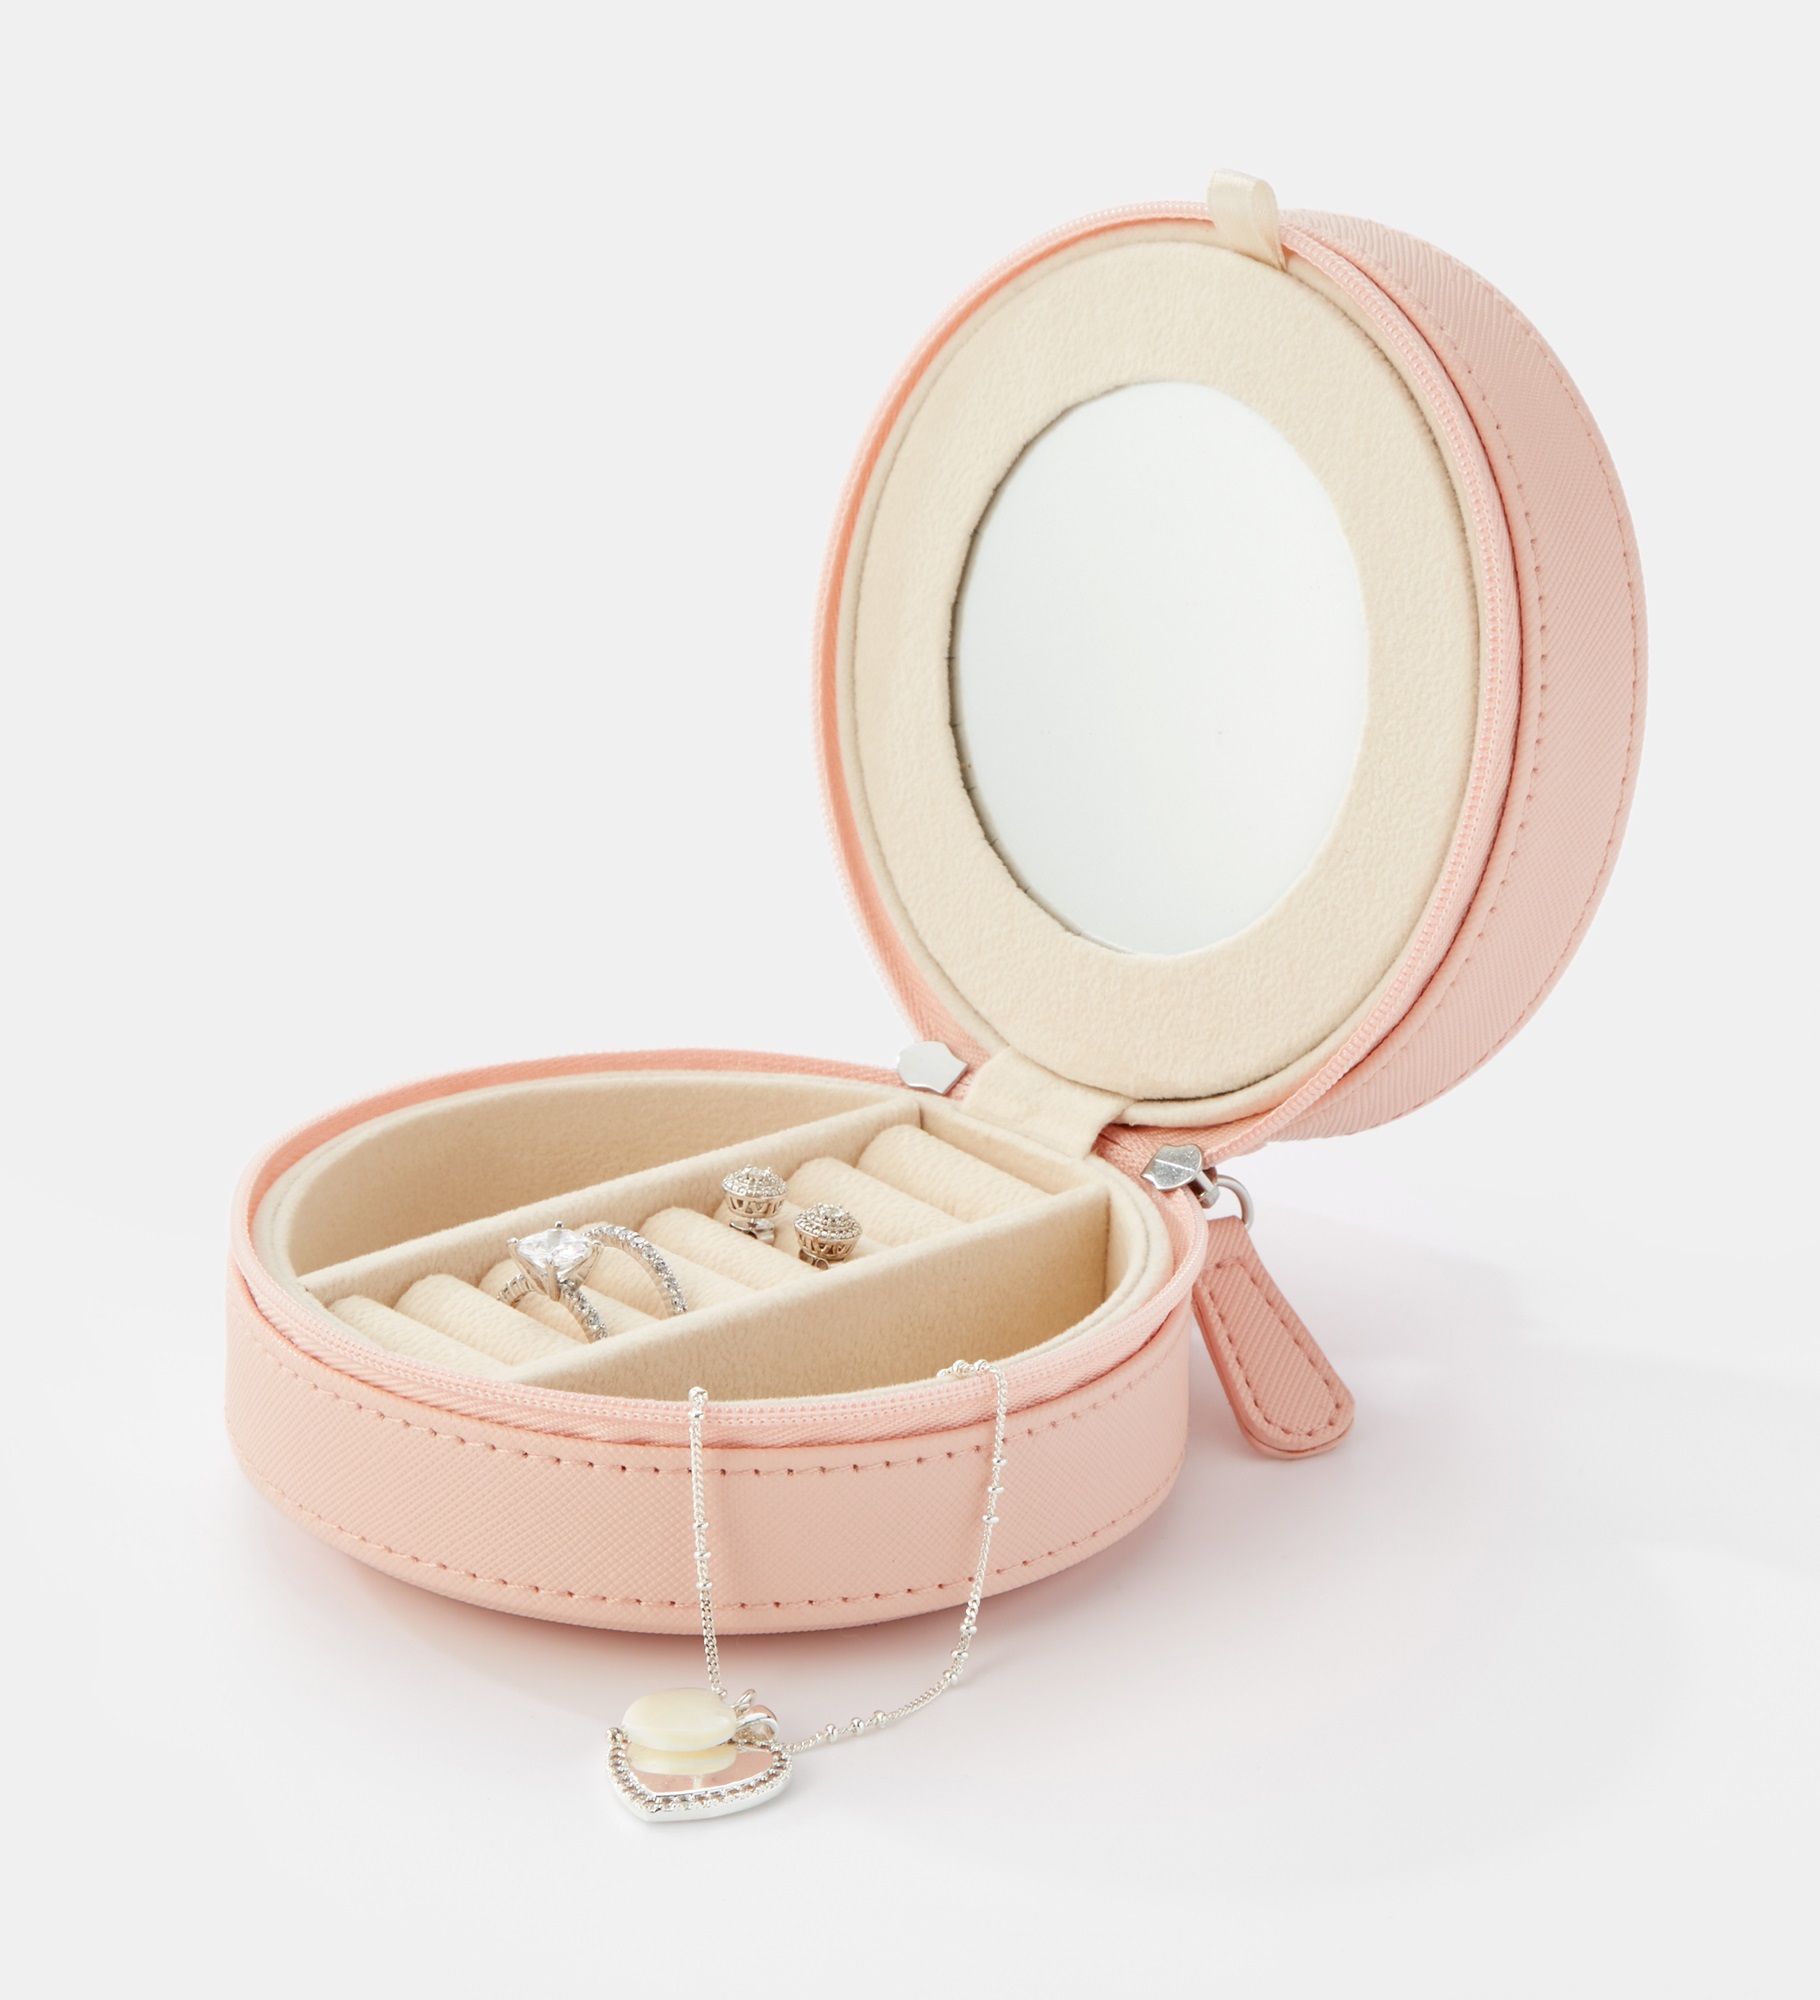  Engraved Round Jewelry Box and Travel Case in Pink